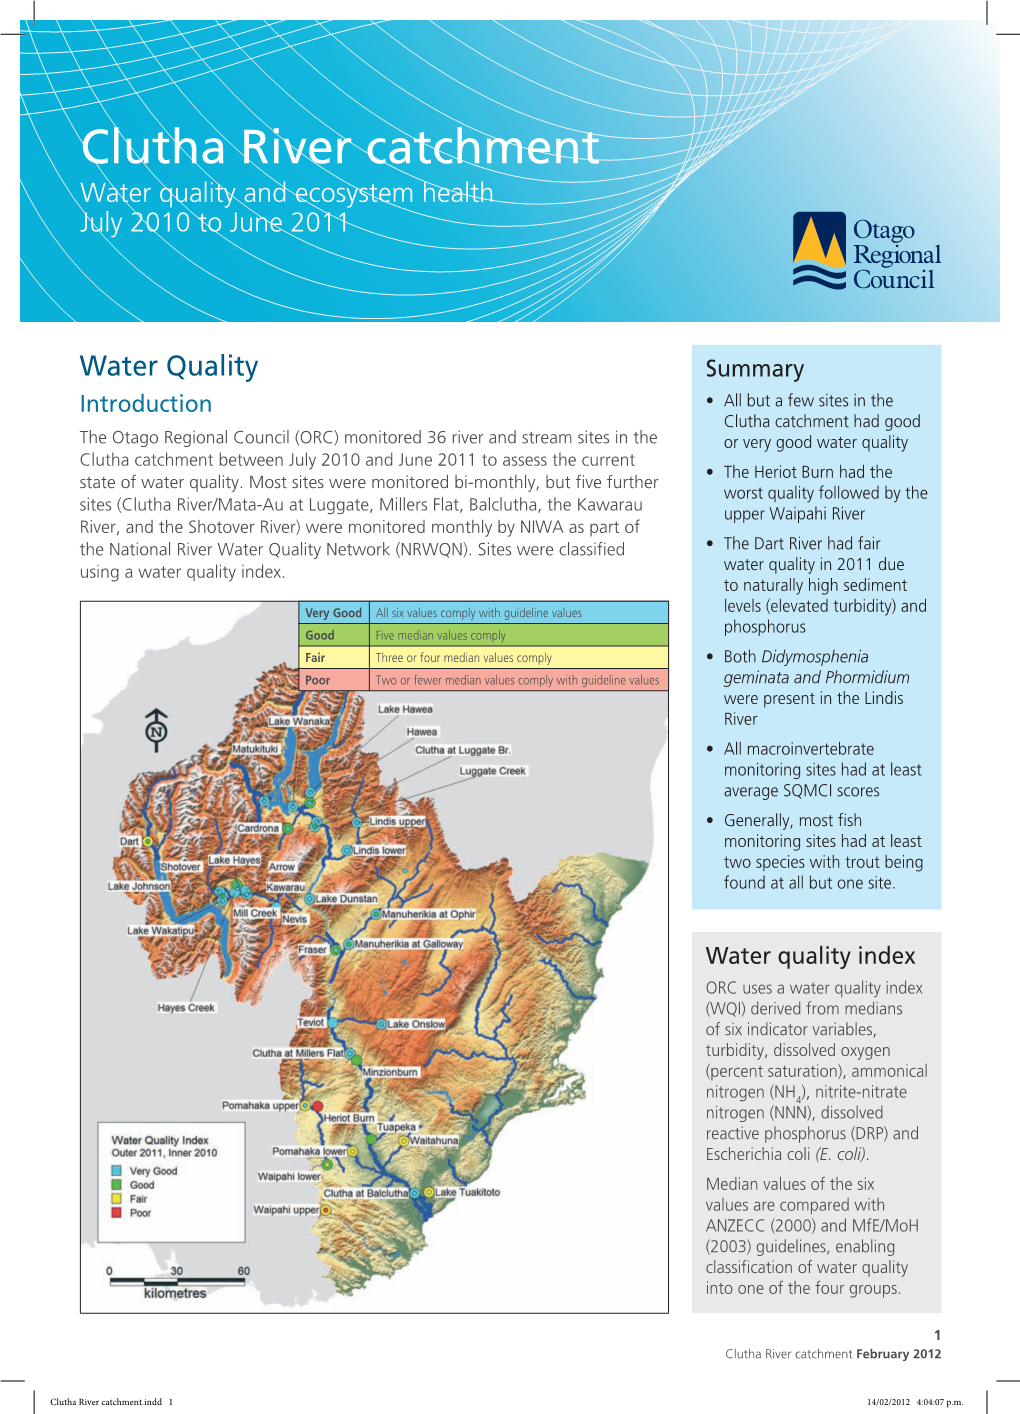 Clutha River Catchment Water Quality and Ecosystem Health July 2010 to June 2011